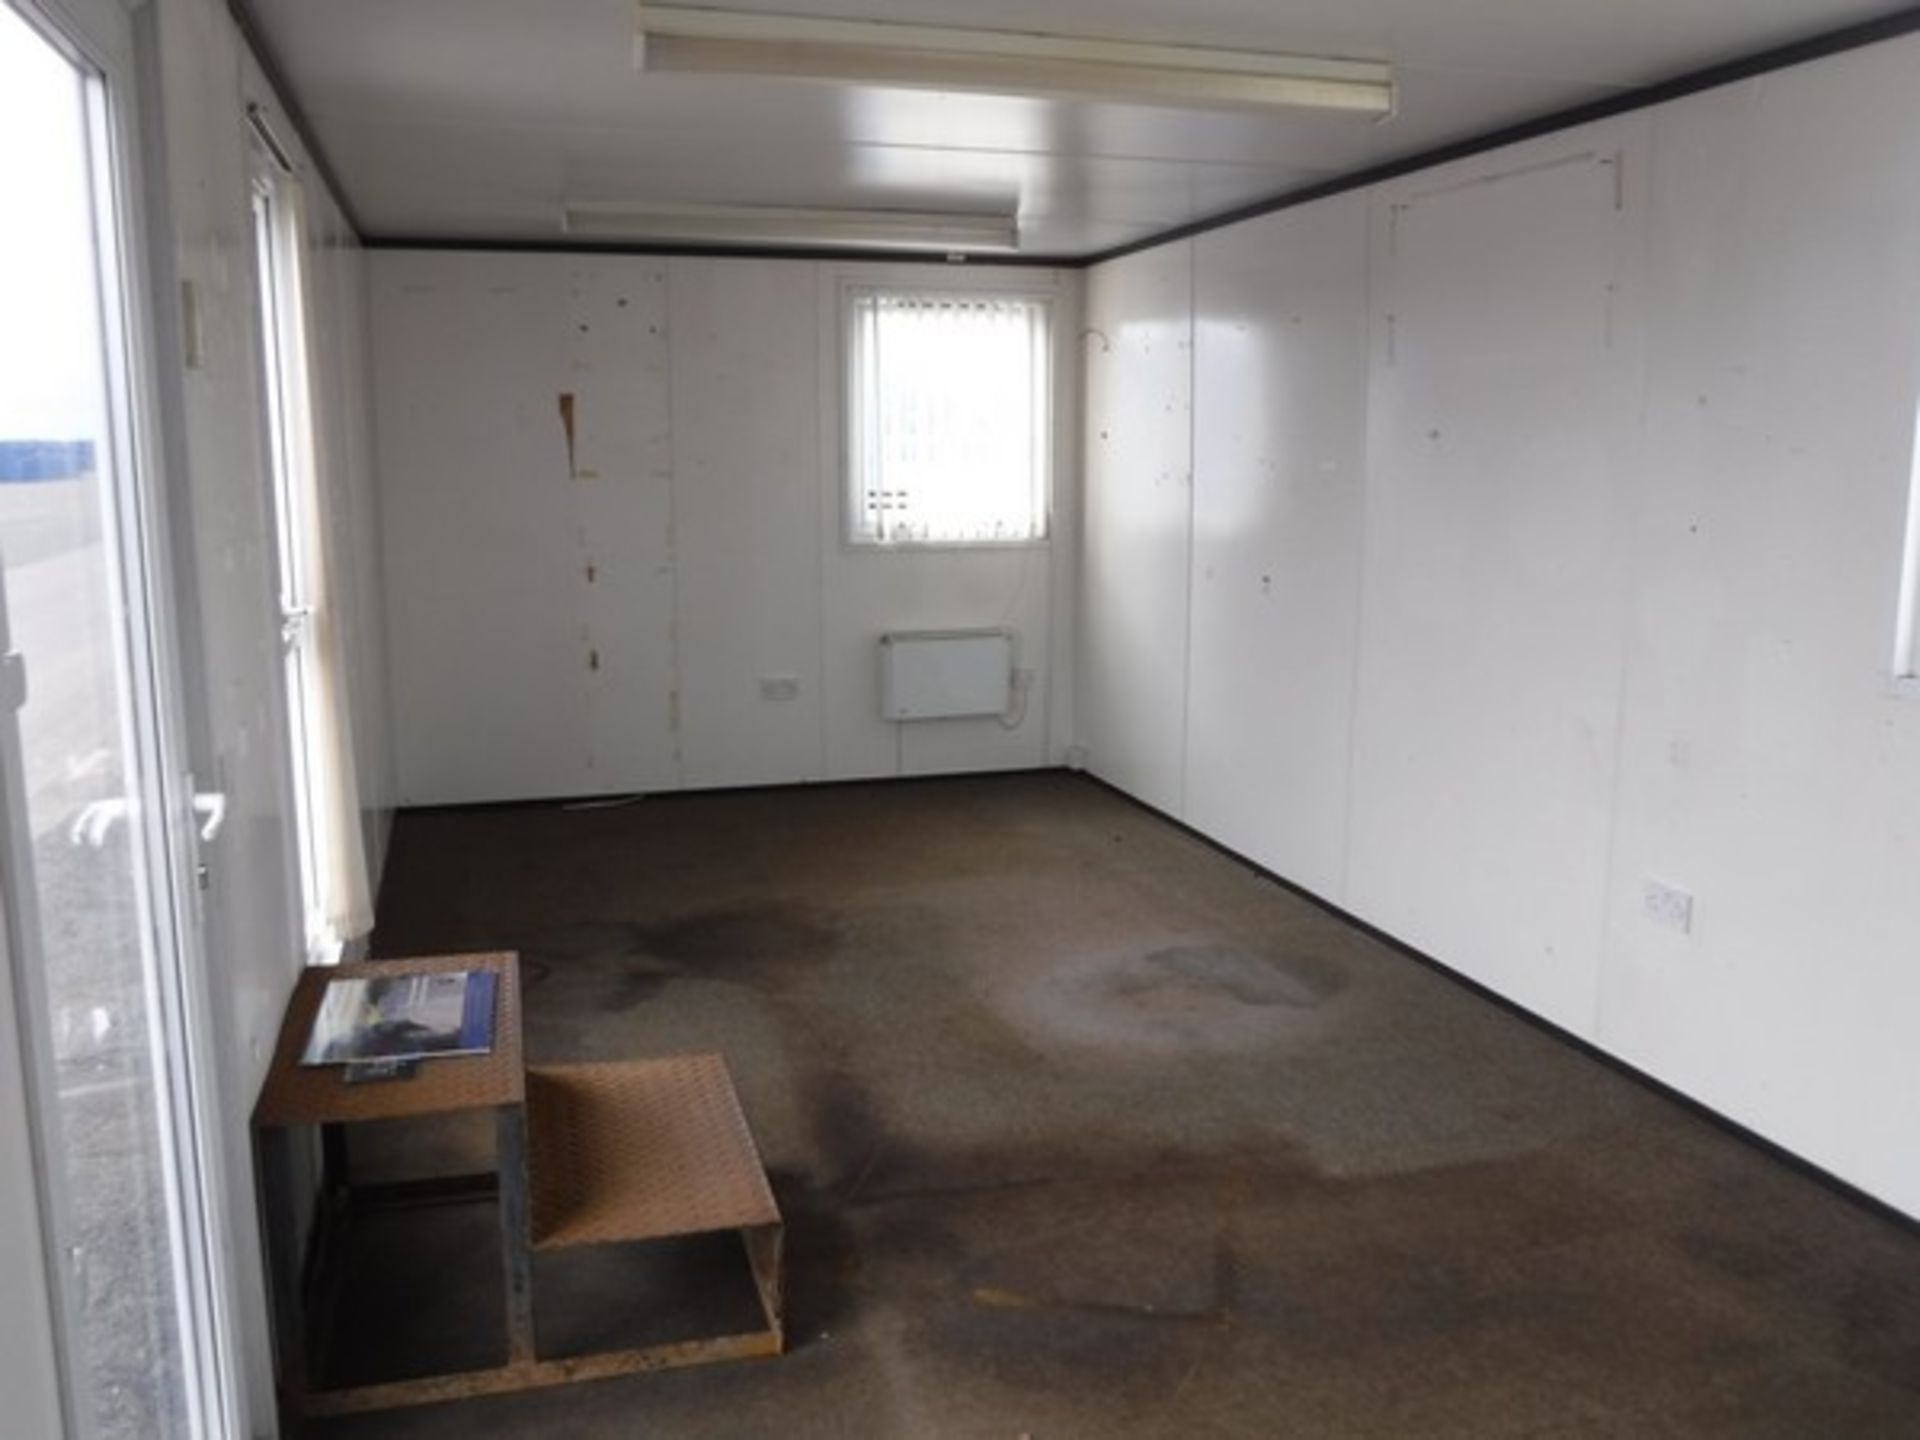 2007 PORTABLE BUILDING. 10m x 3.1m with toilet & kitchen. Double glazed, alarm fitted, insulated. - Bild 10 aus 12